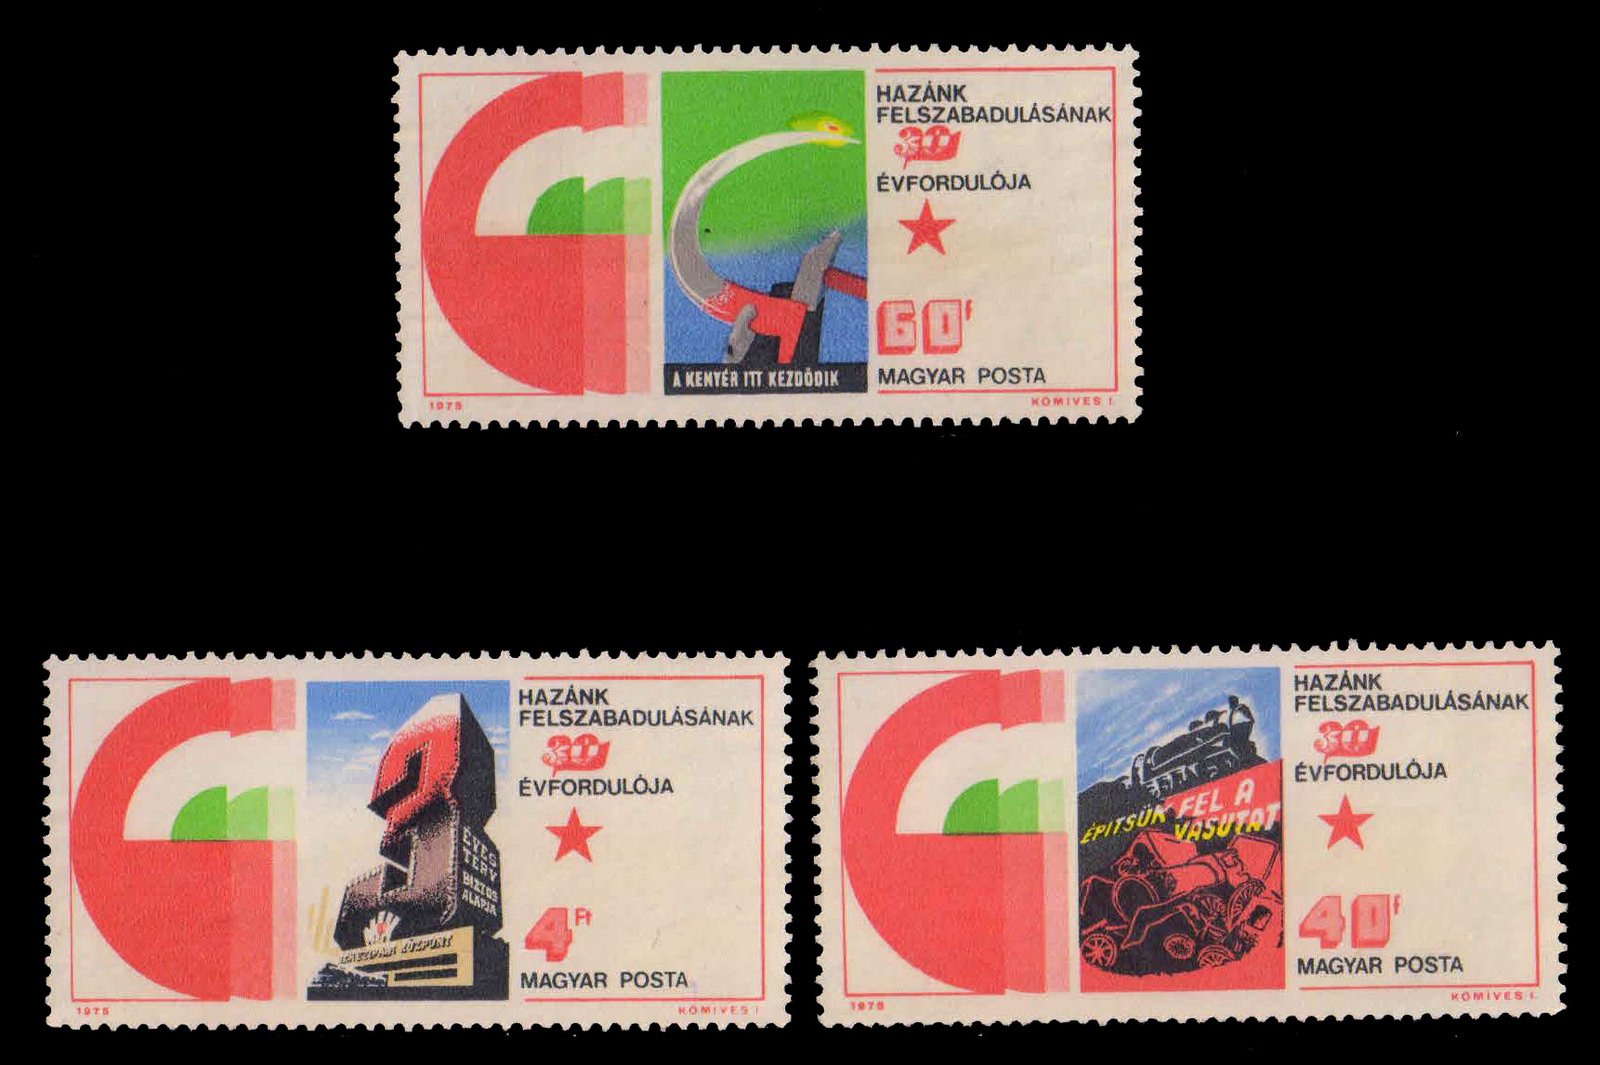 HUNGARY 1975-Railway, Agriculture, Heavy Industry, Set of 3, Mint G/W, S.G. 2946, 47, 49